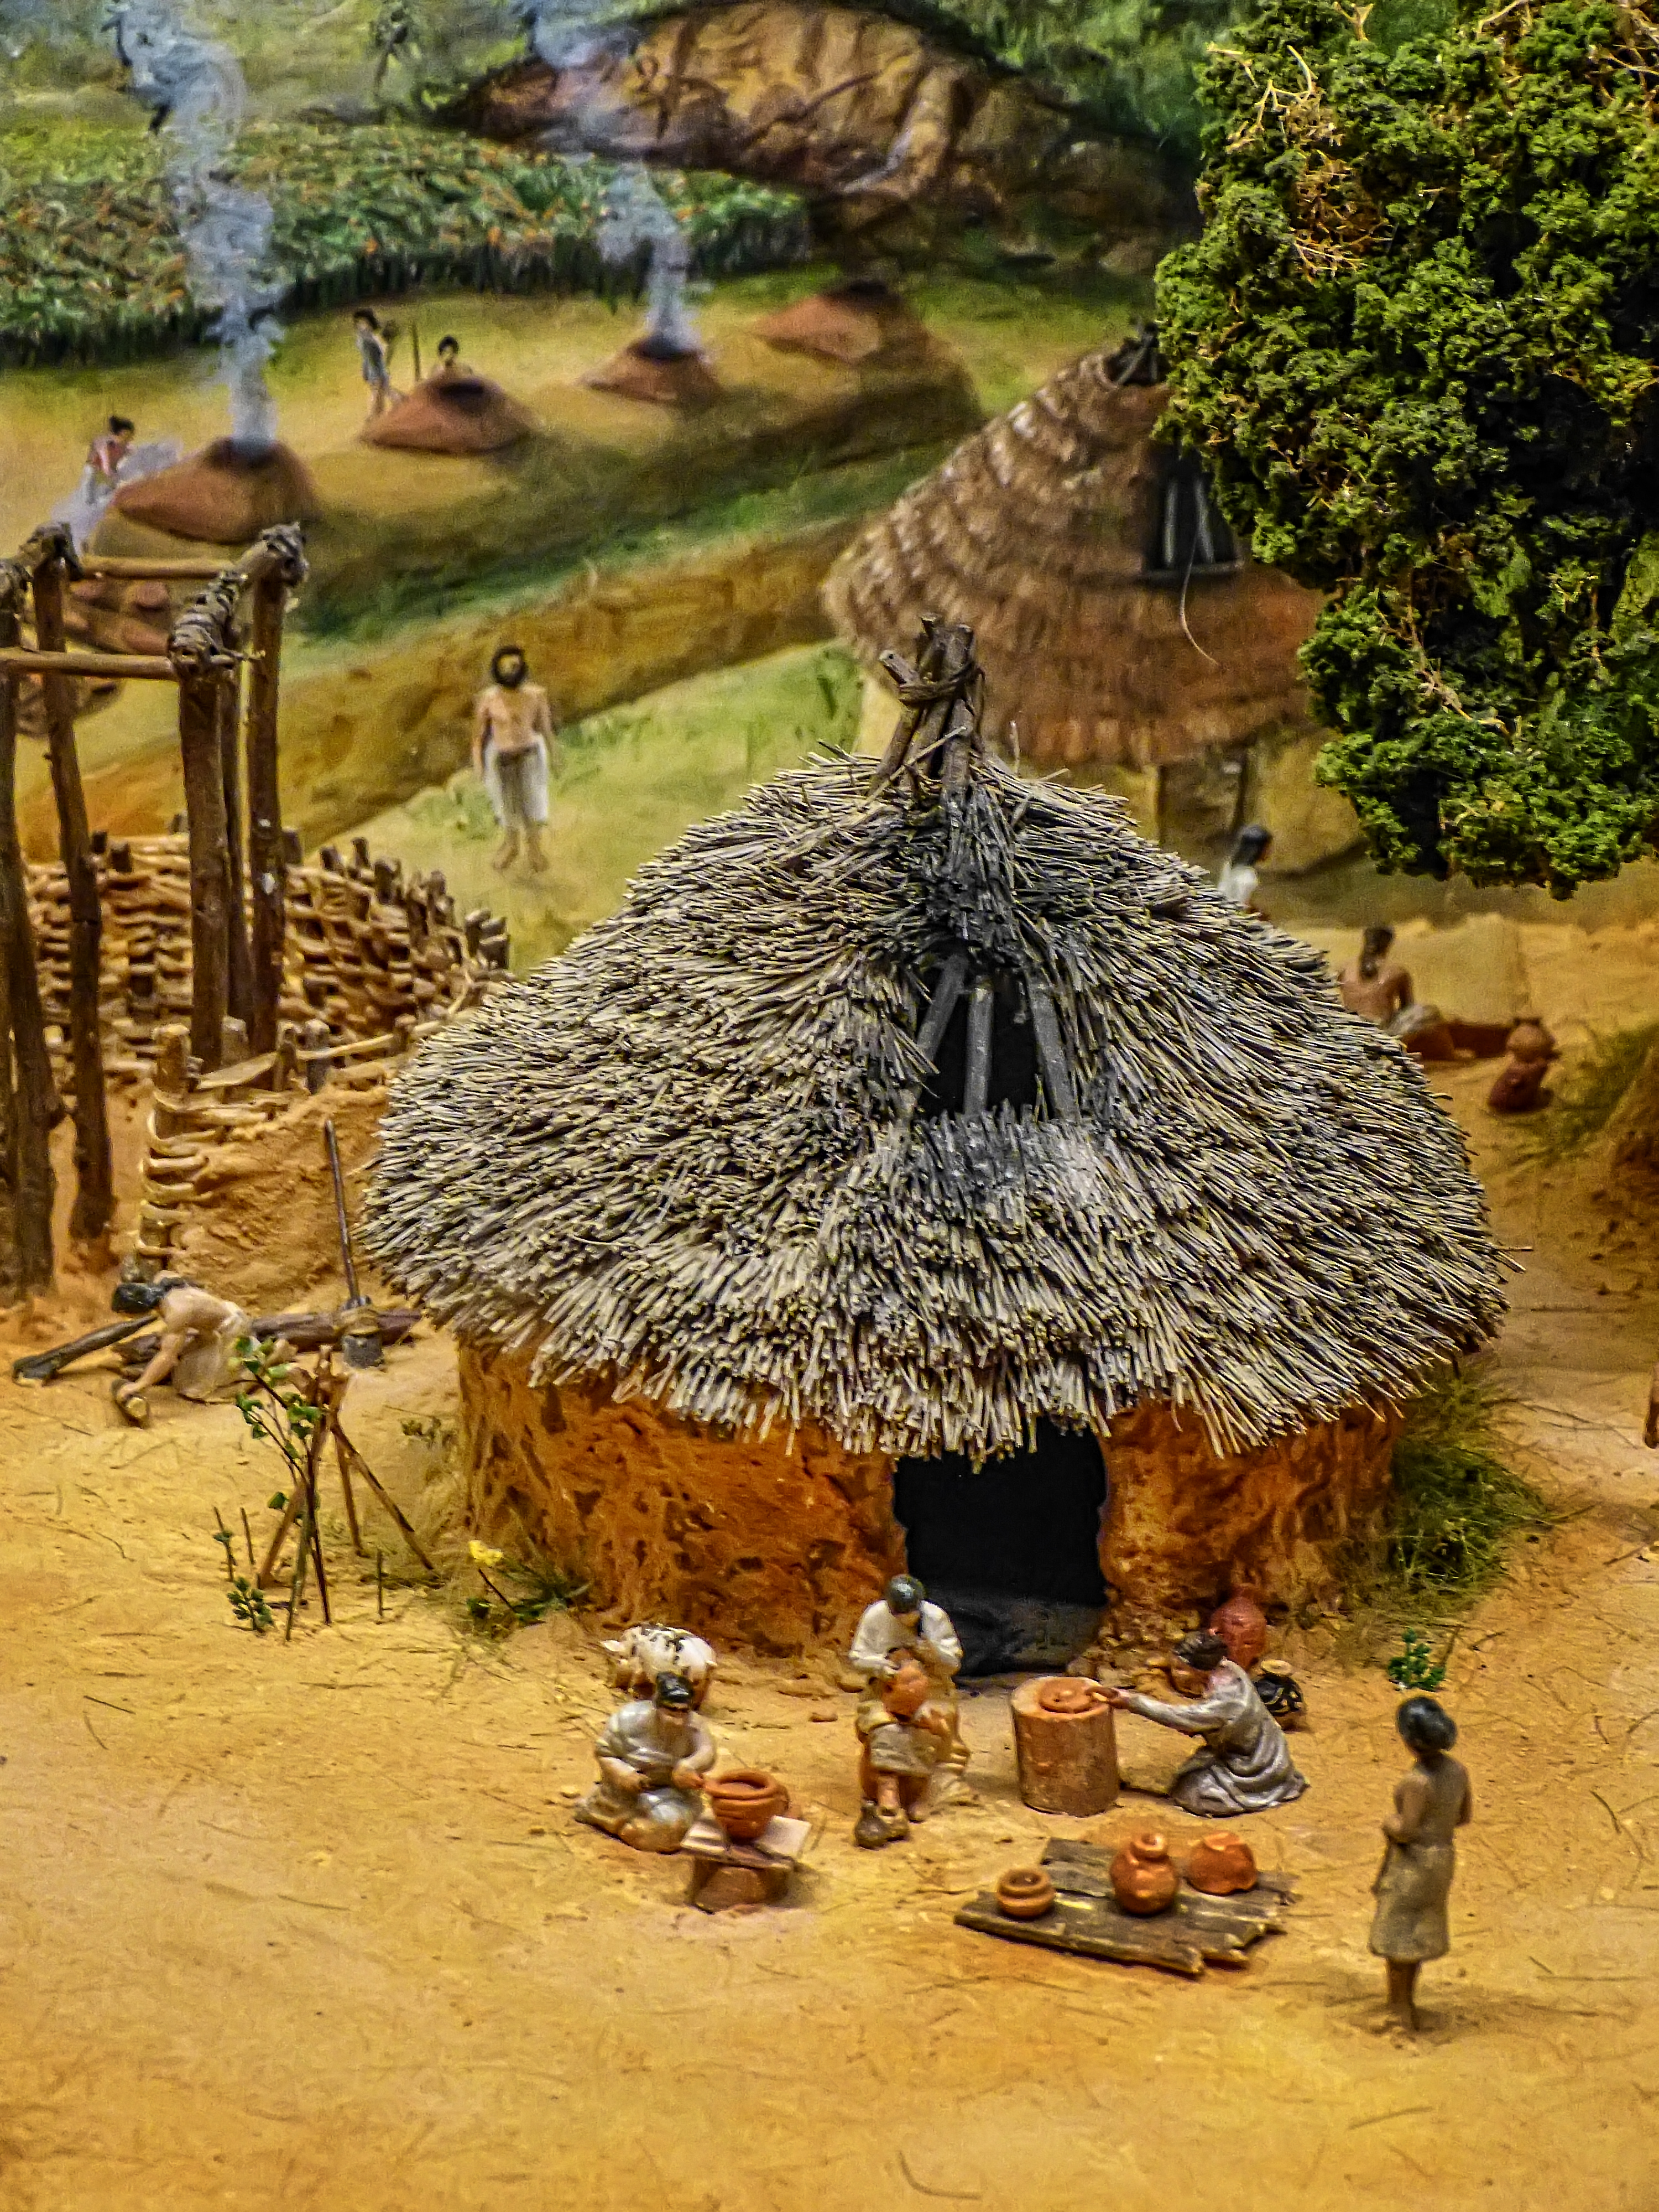 Model_of_Middle_Neolithic_(5000-3000_BCE)_settlement_in_the_Yellow_River_Valley_in_northern_China_(02).jpg